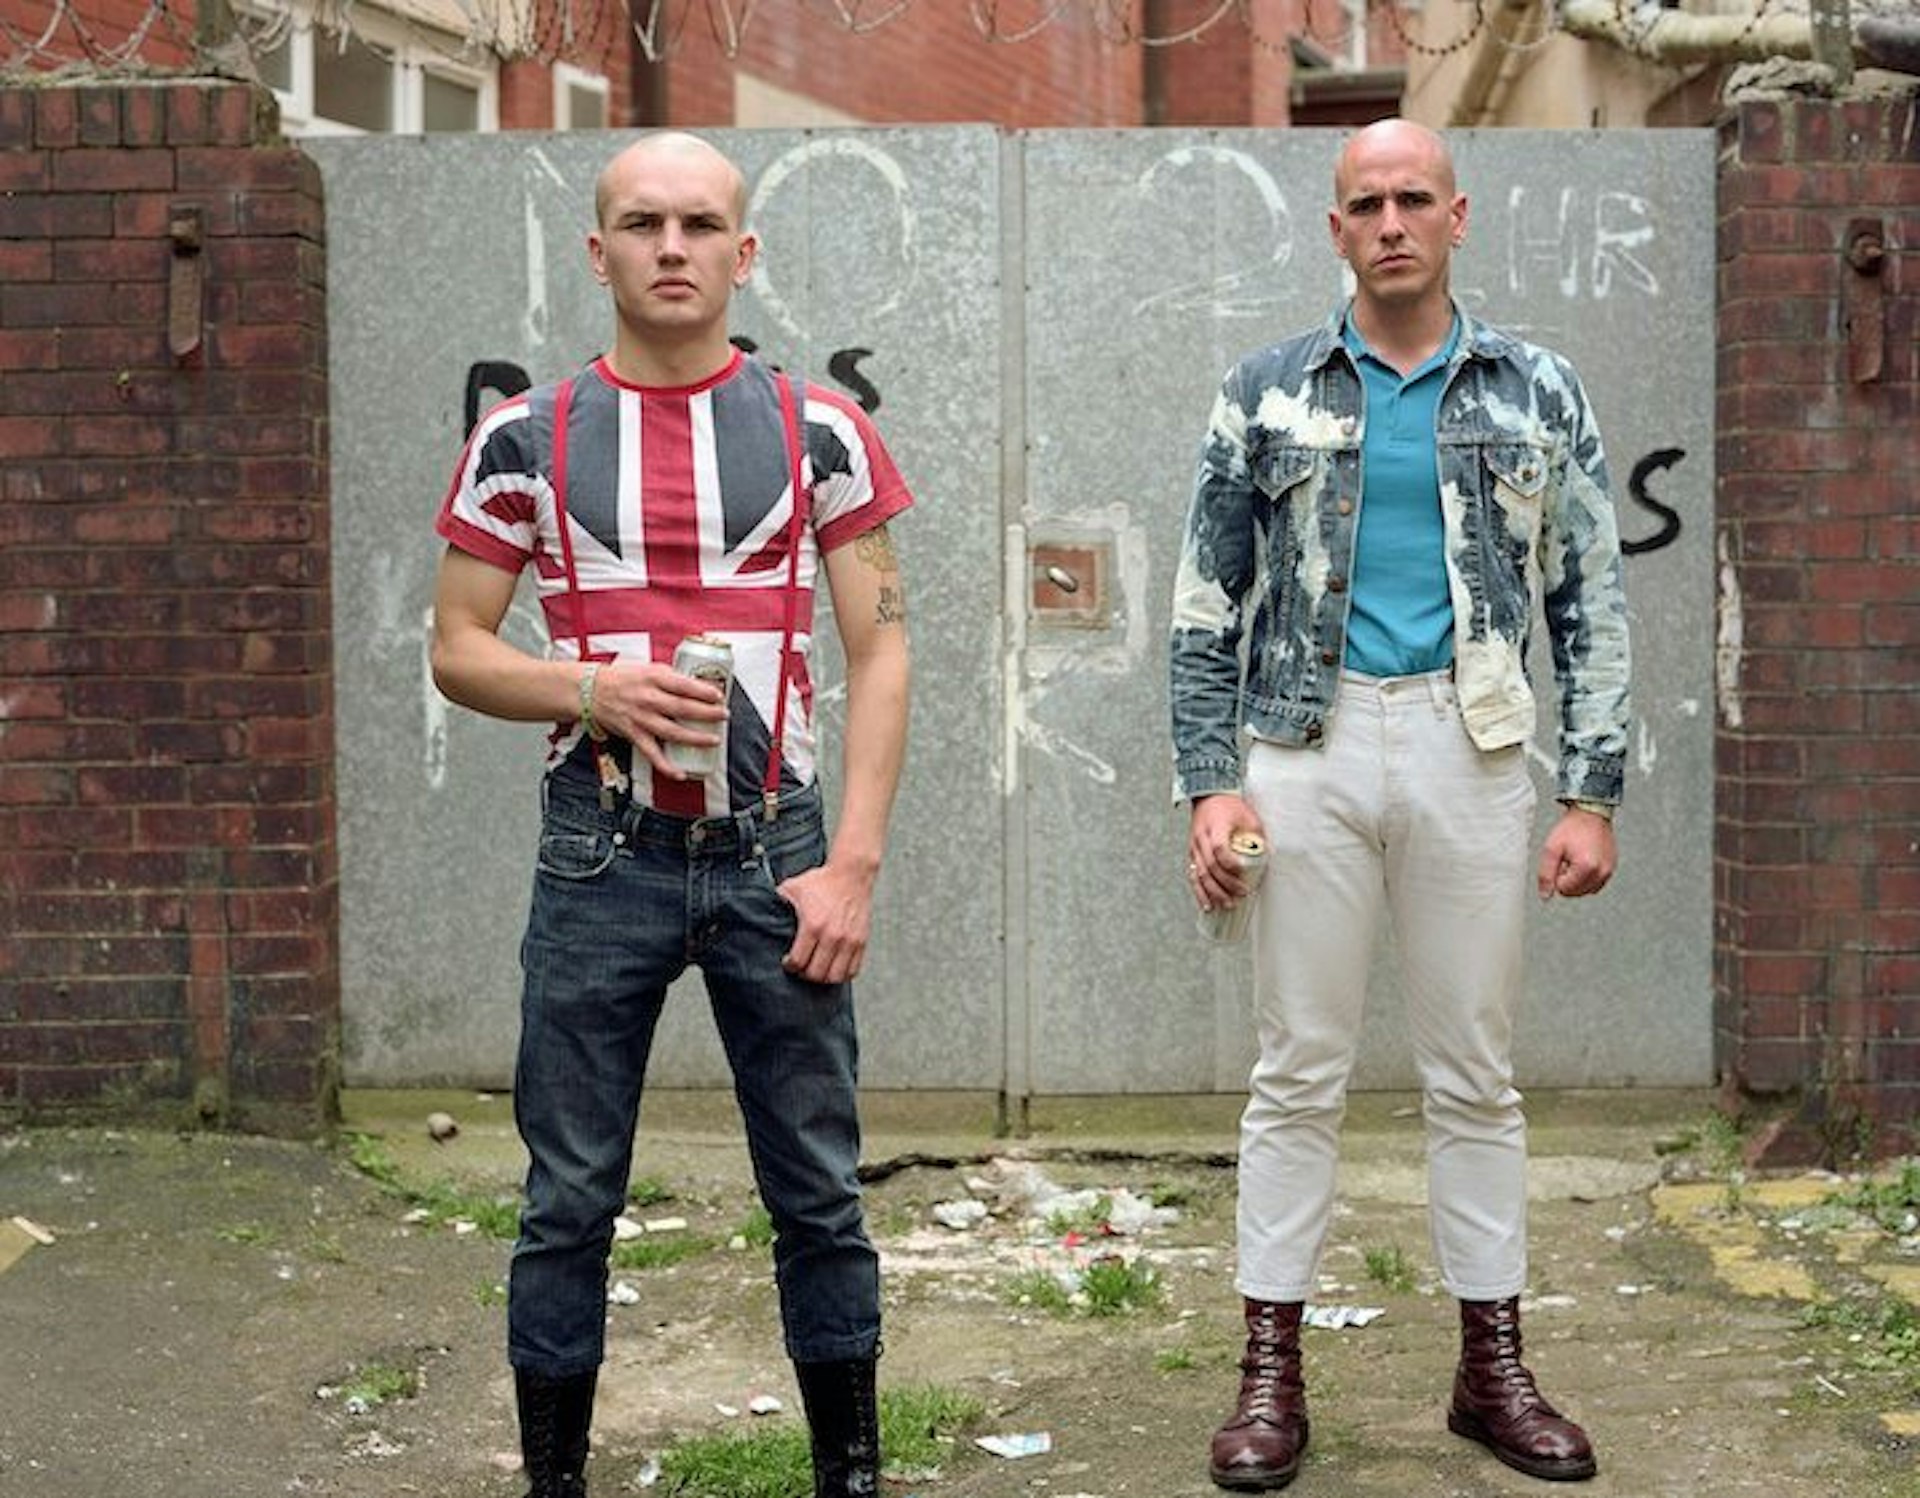 Photos showing a different side to skinhead culture today